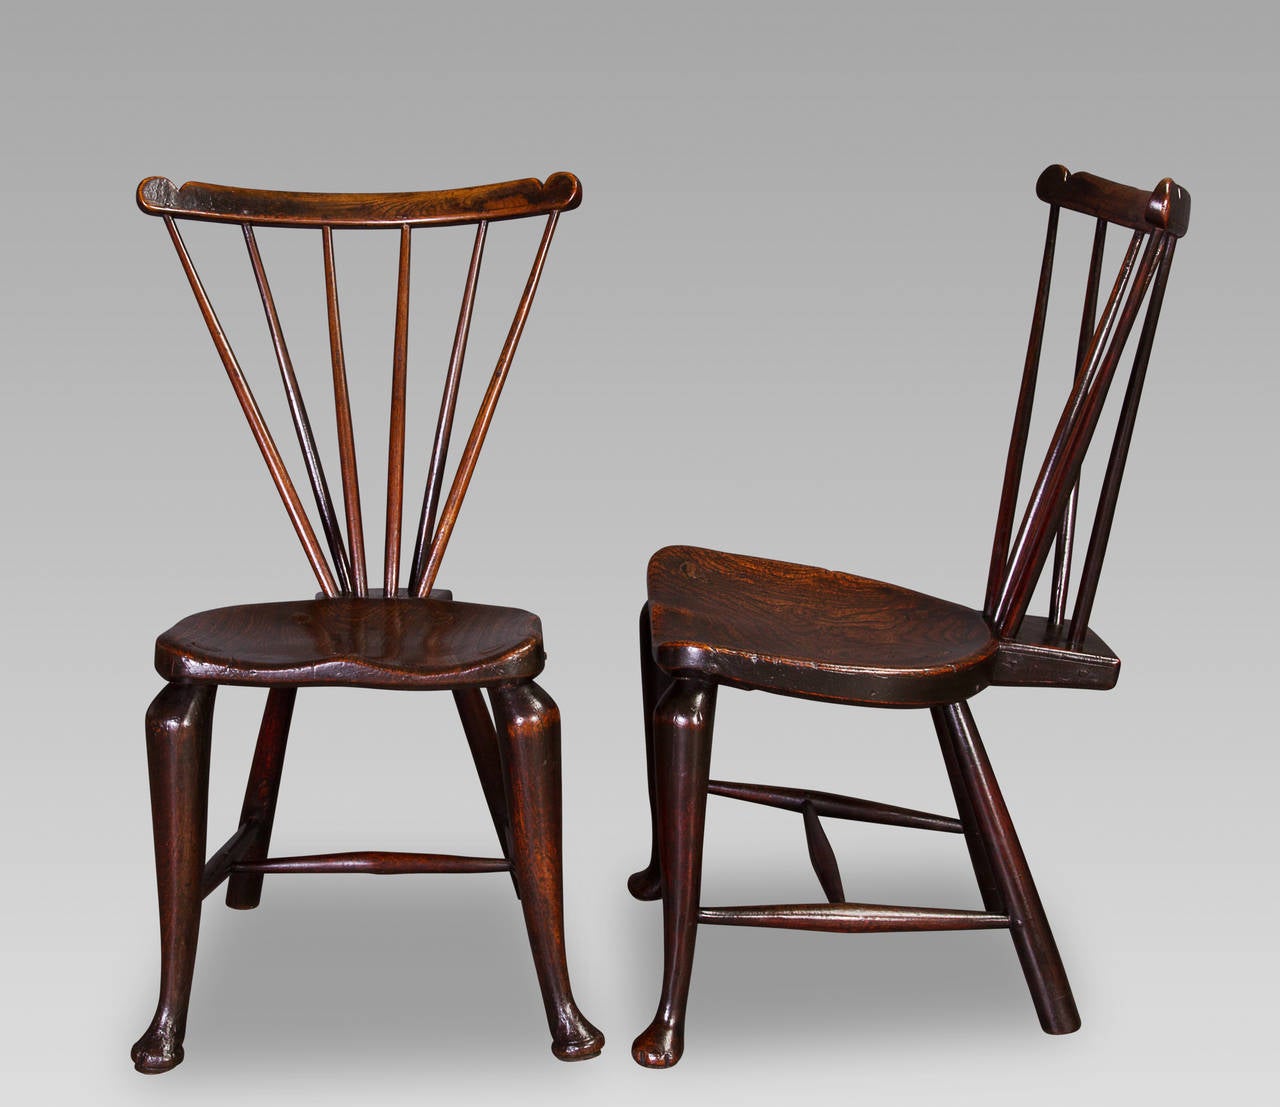 As examples of early Windsor chairs, these stylish pieces are about as good as they get.

Each with a triangular stick-back radiating from an exaggerated rear wedge to the elm deeply dished saddle-seat and held in place by a scroll-ended top